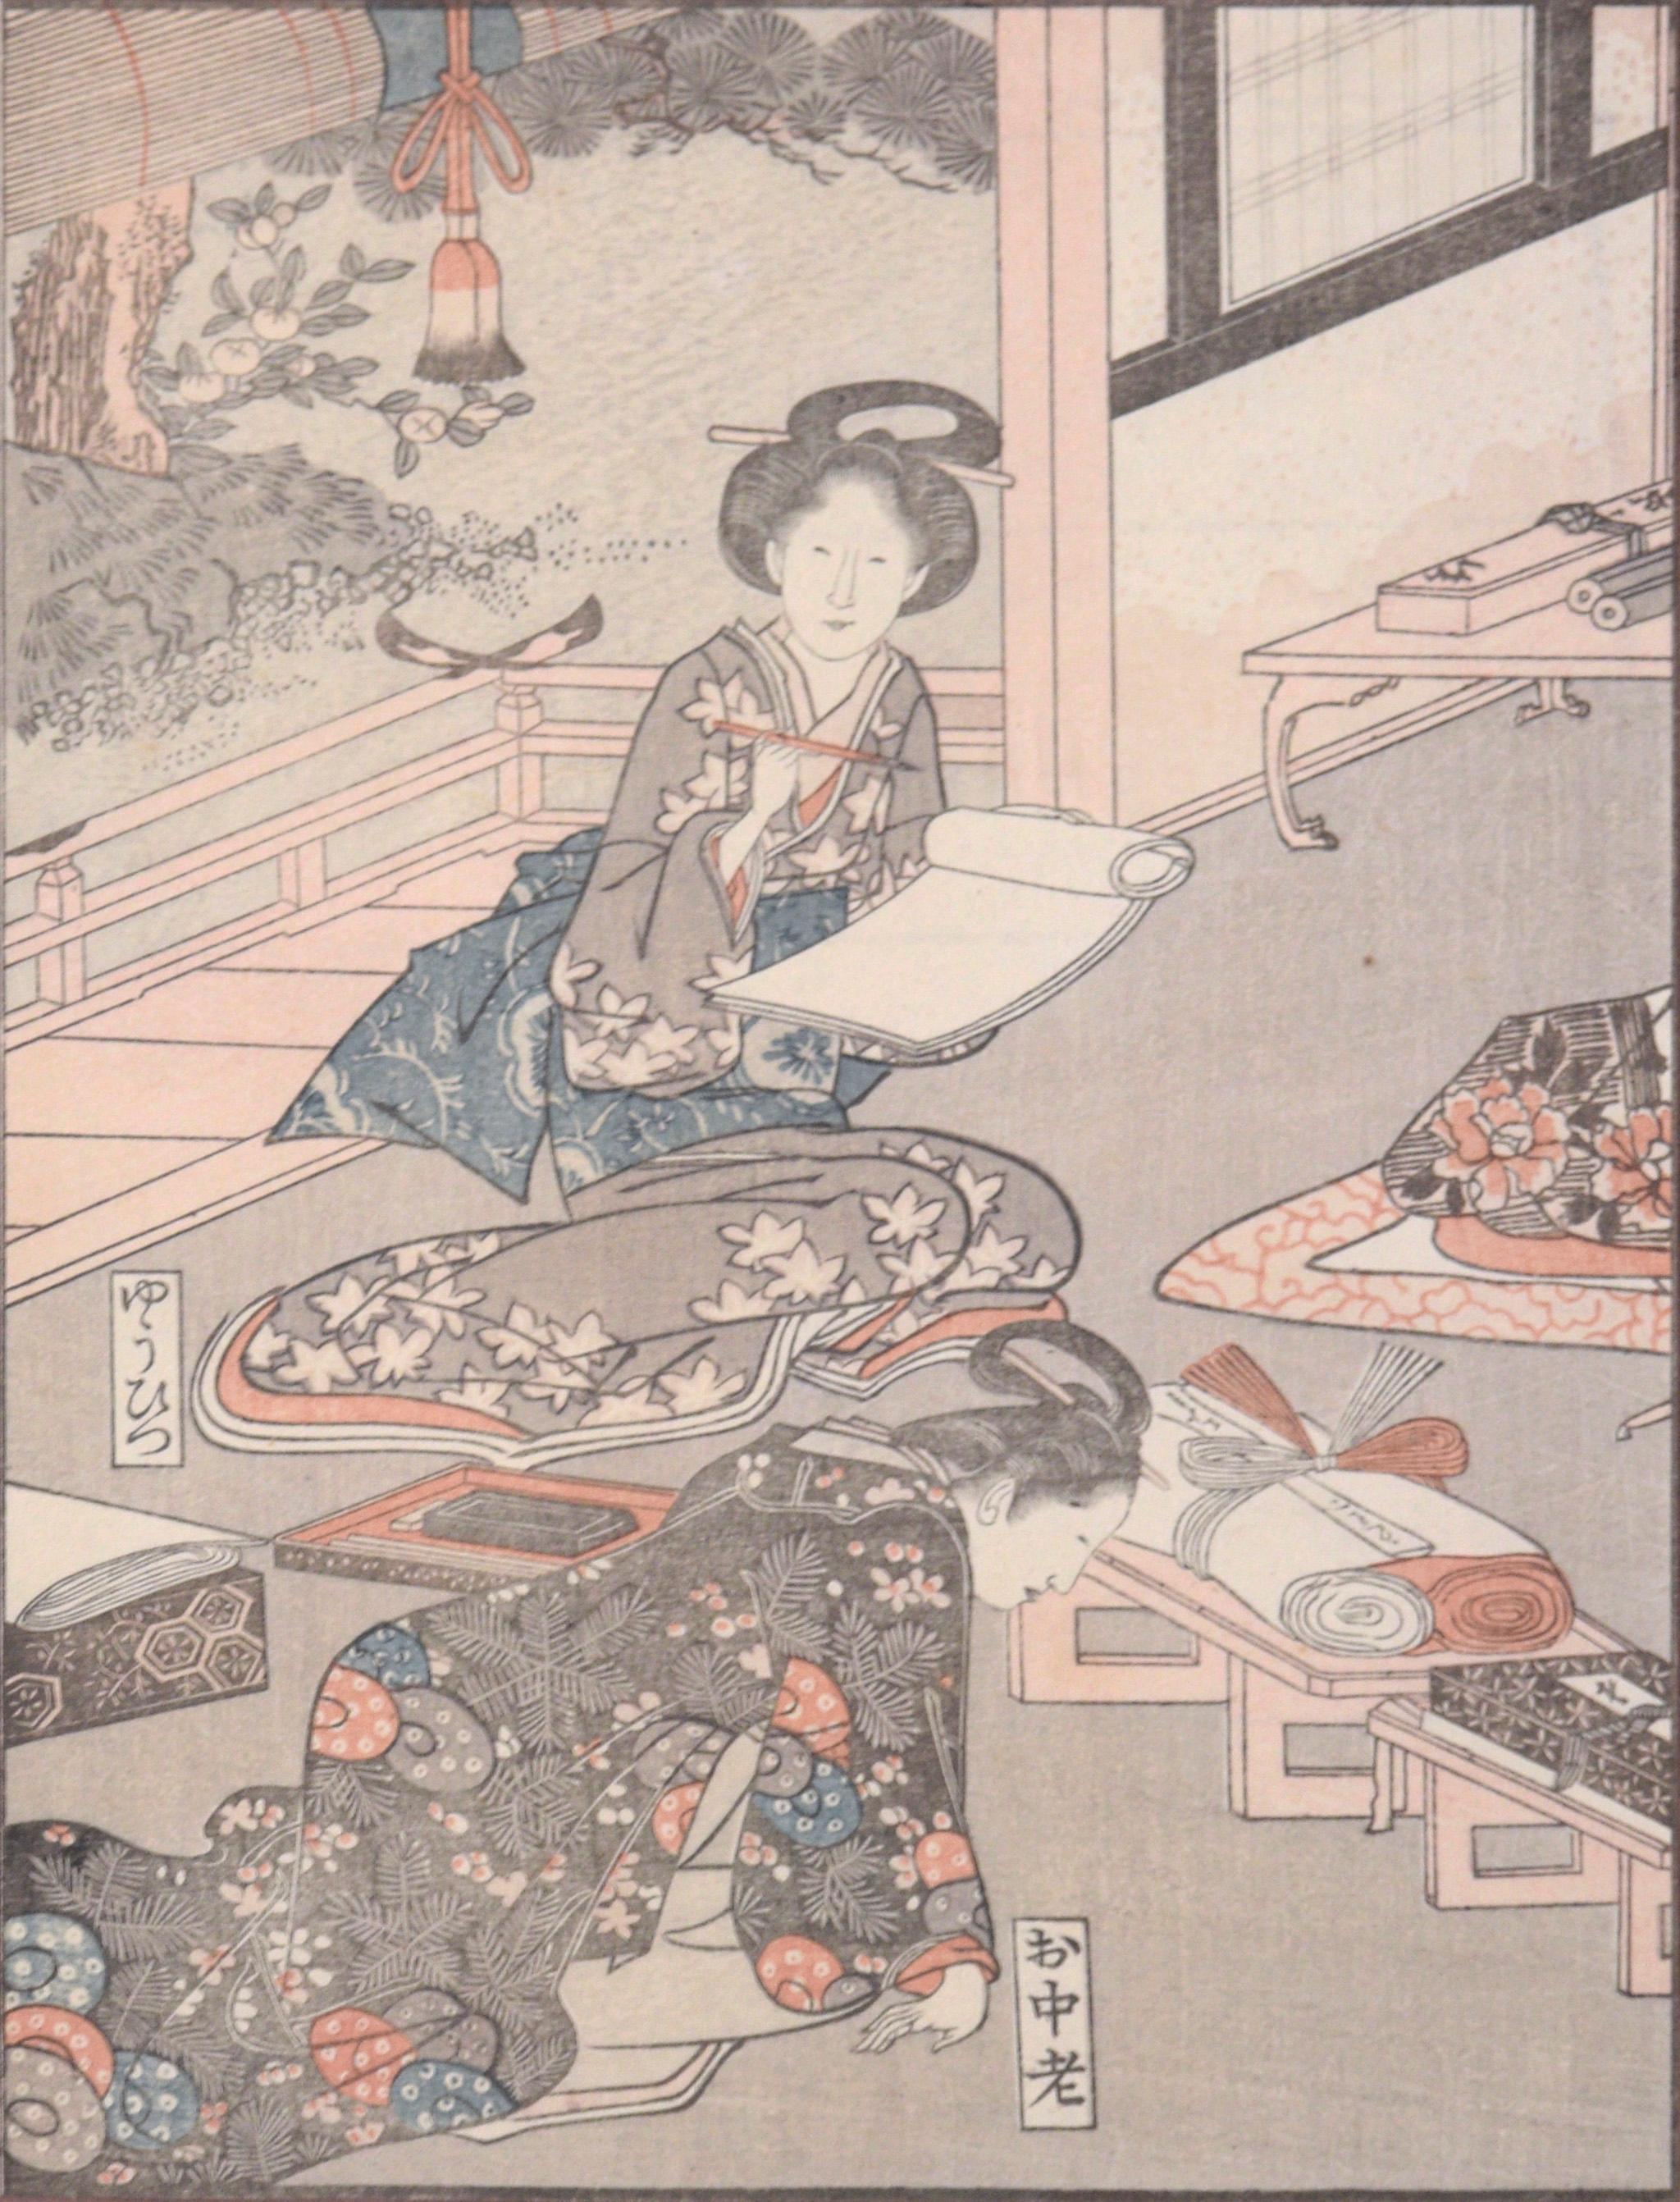 Scribe and Personal Assistant to the Shogun - Japanese Woodblock Print on Paper

Detailed woodblock print by an unknown artist, In the style of Suzuki Harunobu. There are two women in the scene with reams of silk on table. Each is labeled with her